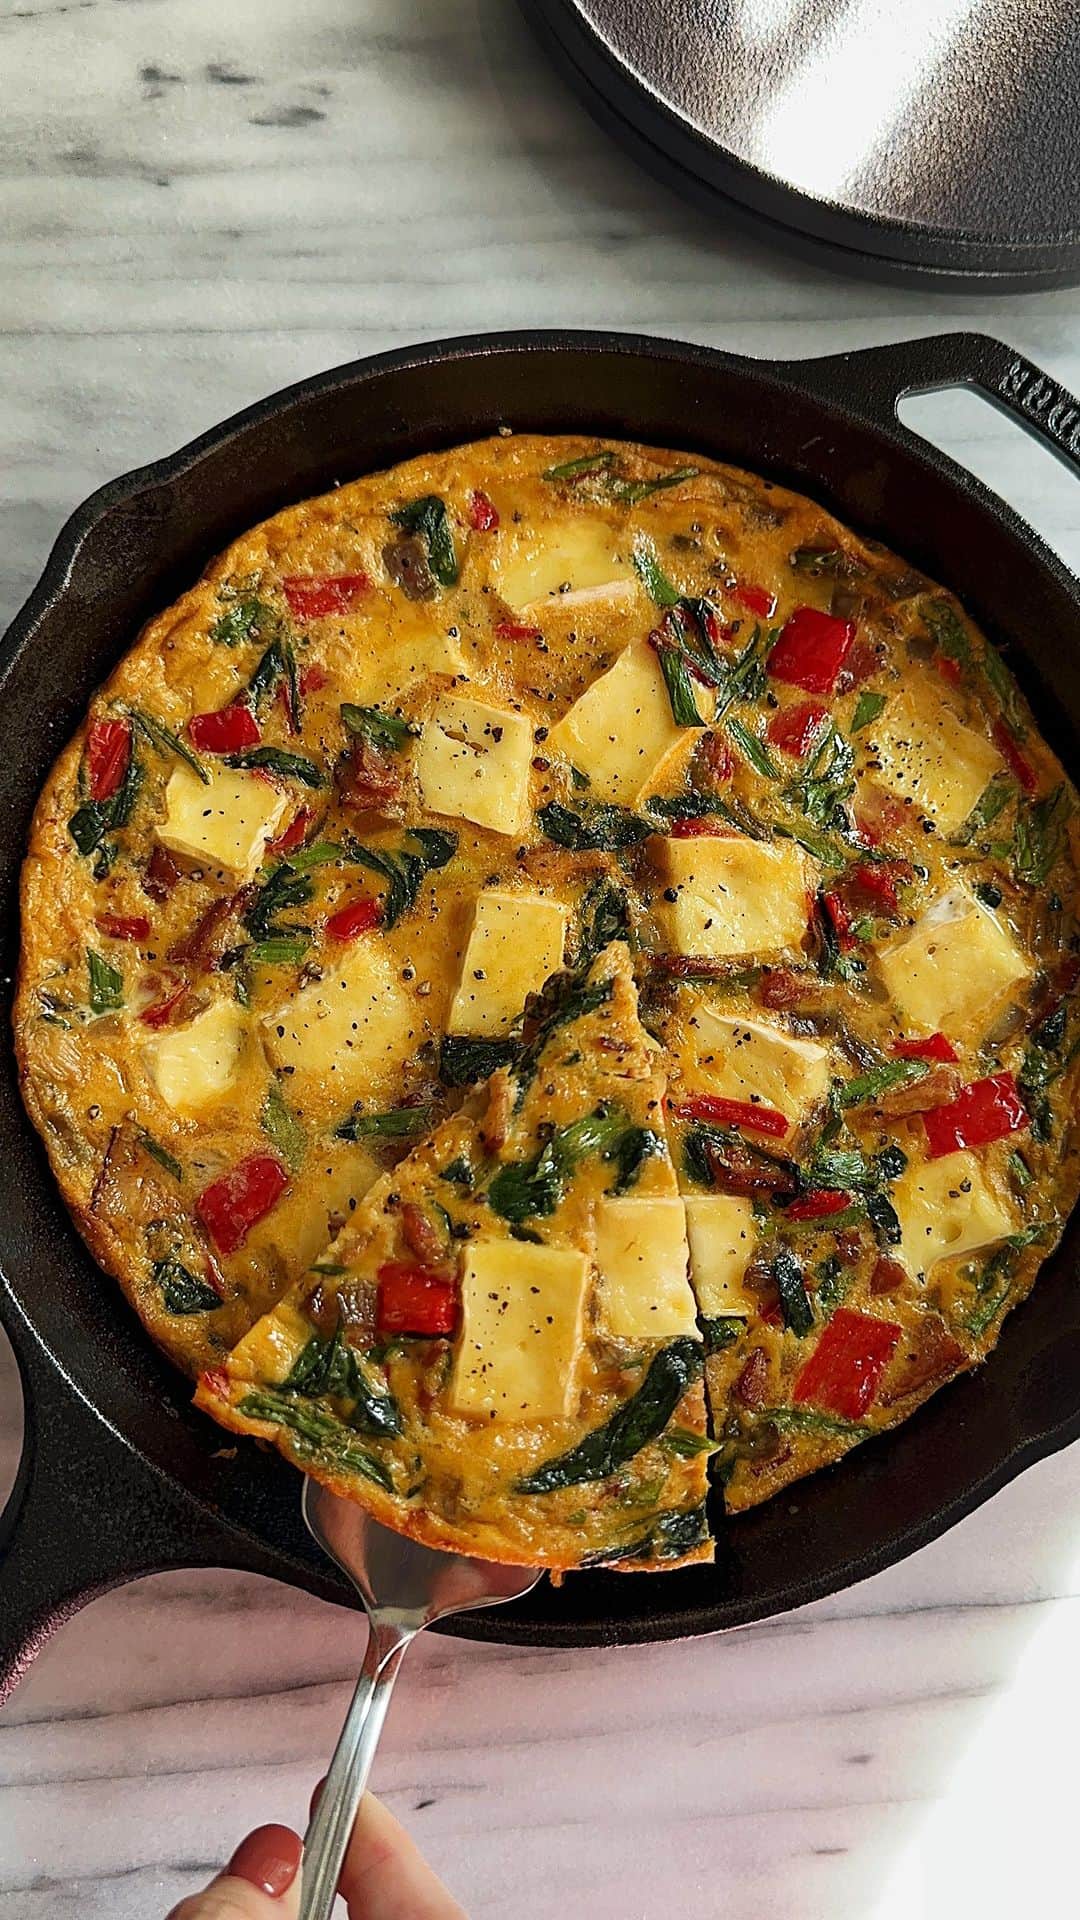 Samantha Leeのインスタグラム：「Eggcellent Frittata with Bacon, Spinach, and Brie! Smokey bacon, gooey Brie, vibrant spinach, and sweet red pepper that’ll leave you craving seconds.  #leesamantha #frittata   Recipe: Olive oil 8 slices of smoked streaky bacon, chopped  1 red onion, diced Red pepper, diced 3 spring onions, sliced diagonally  Handful of spinach 1 Brie  8 large eggs, beaten  4 tbsp grated Parmesan cheese  Salt and black pepper  1. Preheat the oven to 180°C. 2. In a large mixing bowl whisk together eggs, Parmesan, spring onions and season generously with pepper. Whisk your egg mixture well. Set aside.  3. Heat some olive oil in a 10-inch ovenproof frying pan and fry the bacon for 3-4 minutes. Add the red onions and sweat for a few minutes. Add the red pepper and continue to cook until the bacon is golden brown. Add the spring onions(white) and sweat for 3-4 minutes until everything is tender. Stir in spinach, roughly mixing it through the vegetables. Season with salt.  4. Now place the cooked bacon and vegetable mixture into the bowl with the egg mixture and whisk to combine.  5. Warm the pan over medium heat and drizzle some olive oil. Pour the mixture back into it. Cut one Brie into chunks and scatter on top. As the omelette begins to bubble and set around the edges, grate some Parmesan on top and season with pepper.  6. Place the pan in the hot oven for around 10 minutes until cooked through and golden on top.  Serve warm.」